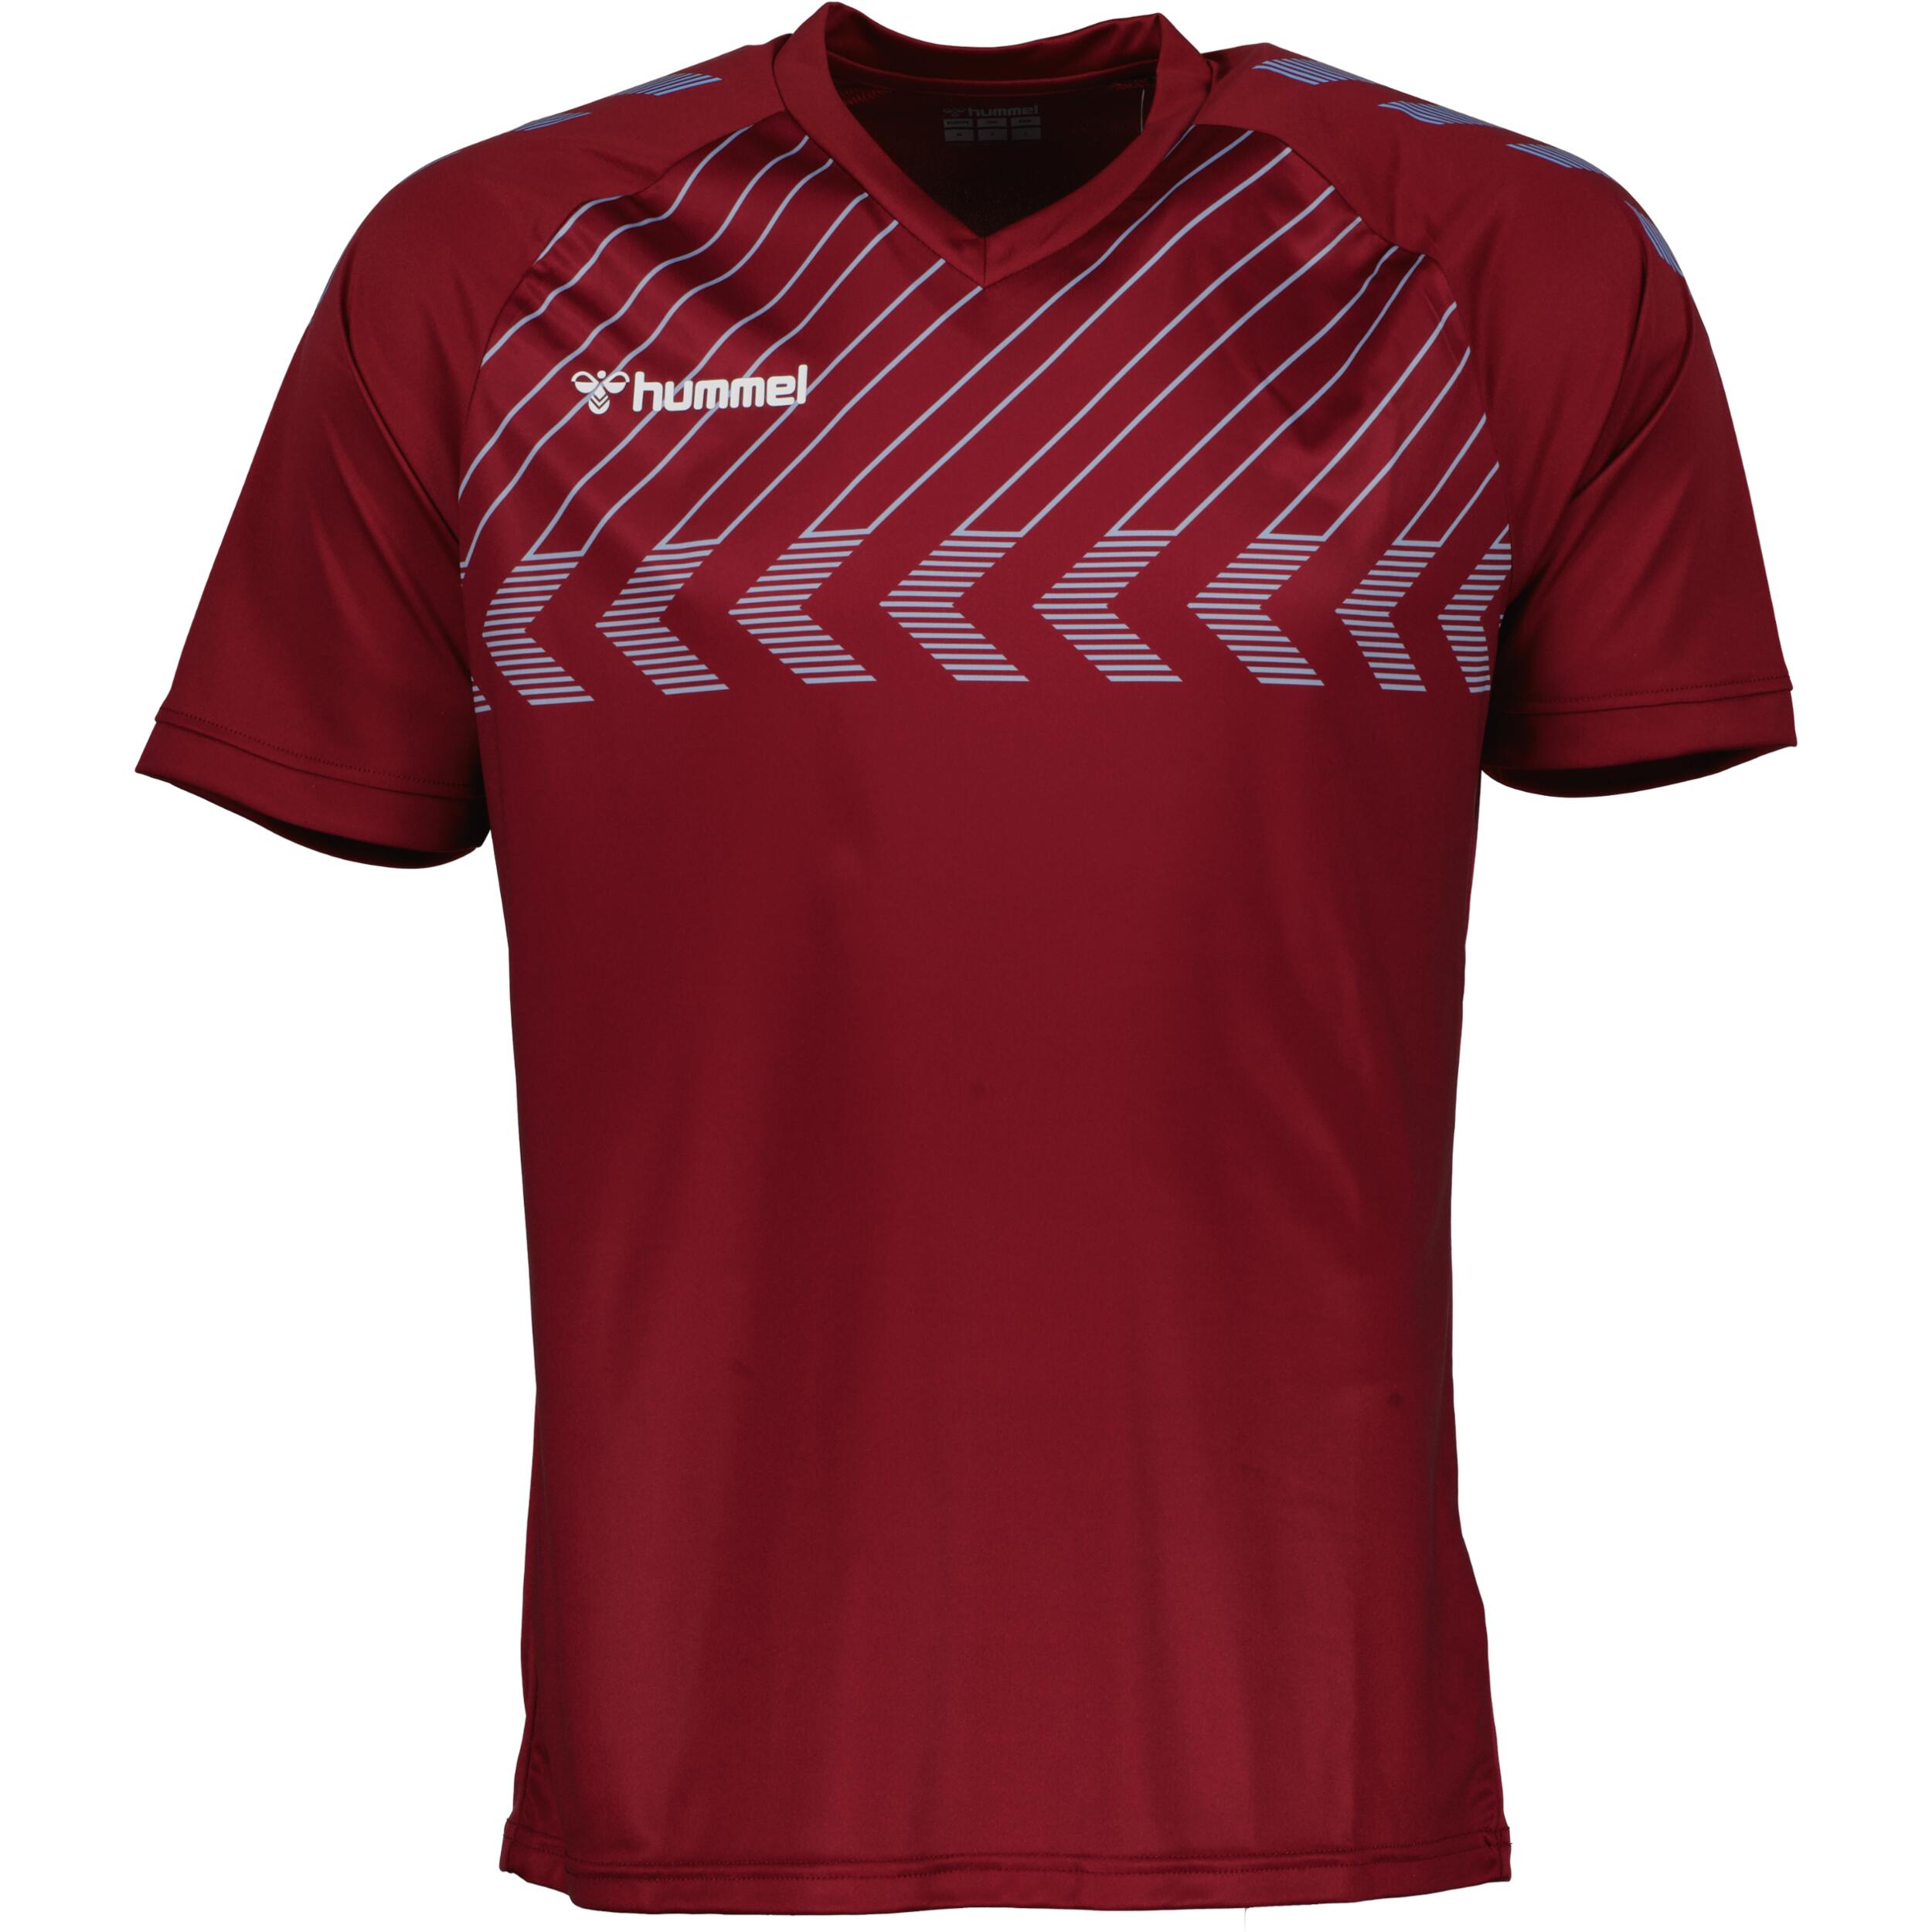 HUMMEL Poly jersey for kids, great for football, in maroon